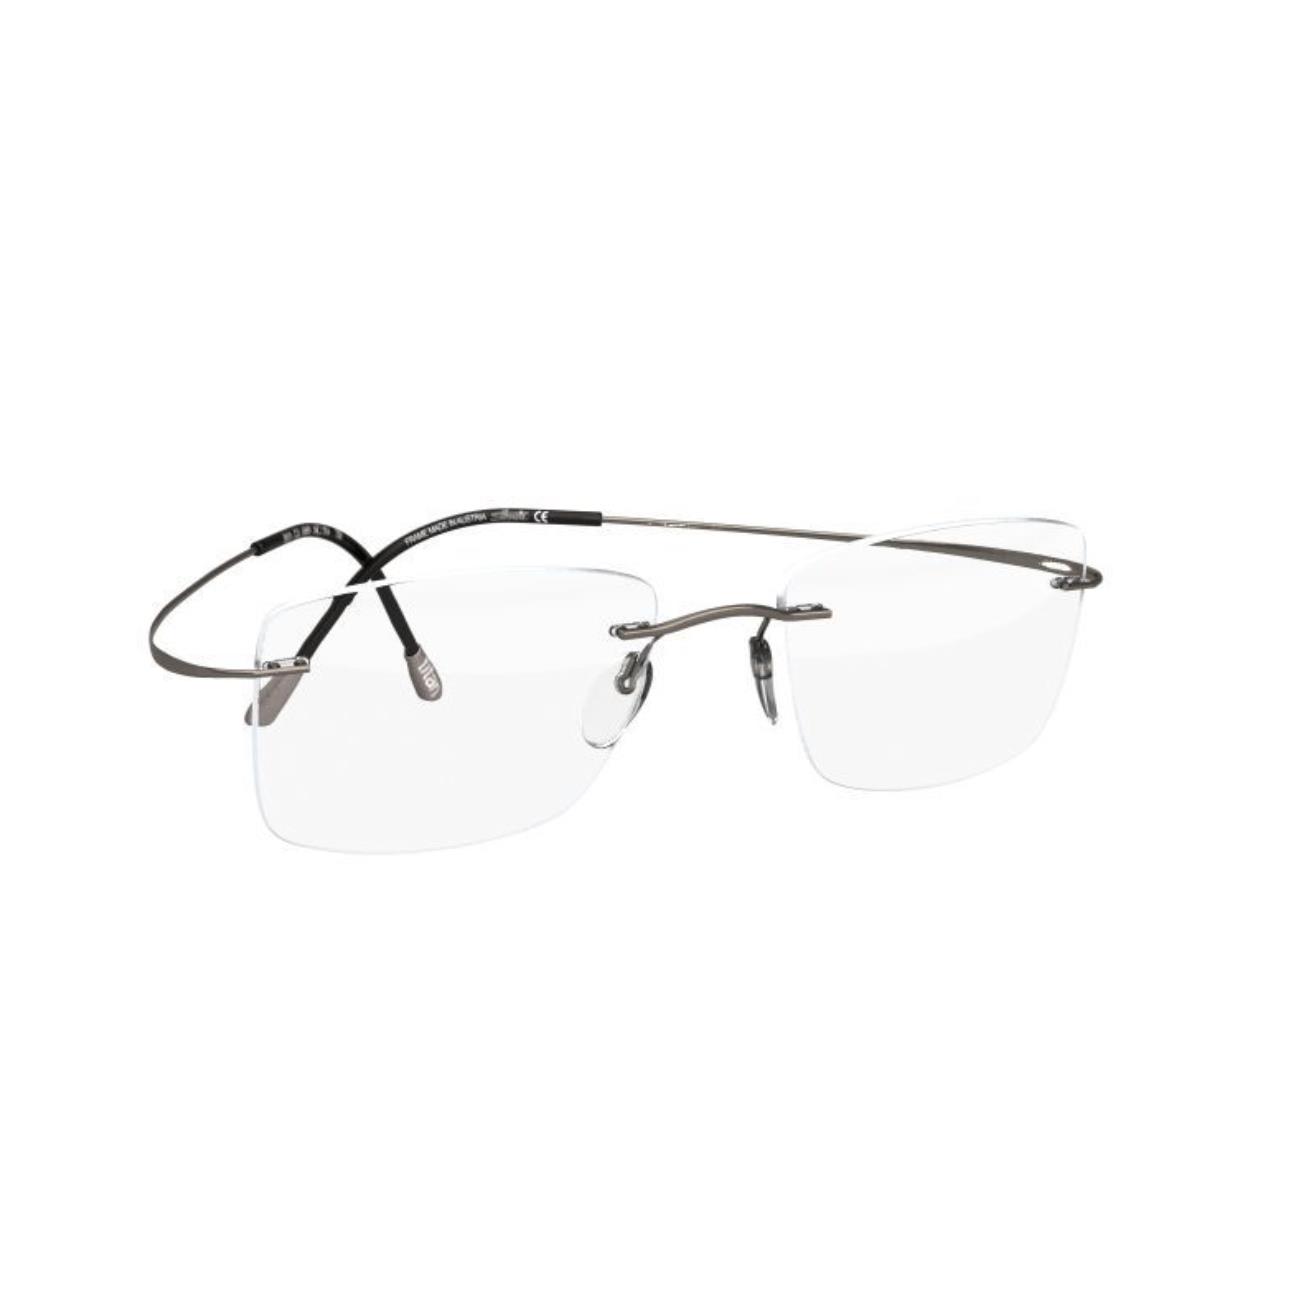 Silhouette Rimless Eyeglasses Titan Minimal Art The Must Collection Frames FOSSIL - 6560, SIZE: 54-19 150, SHAPE - CQ